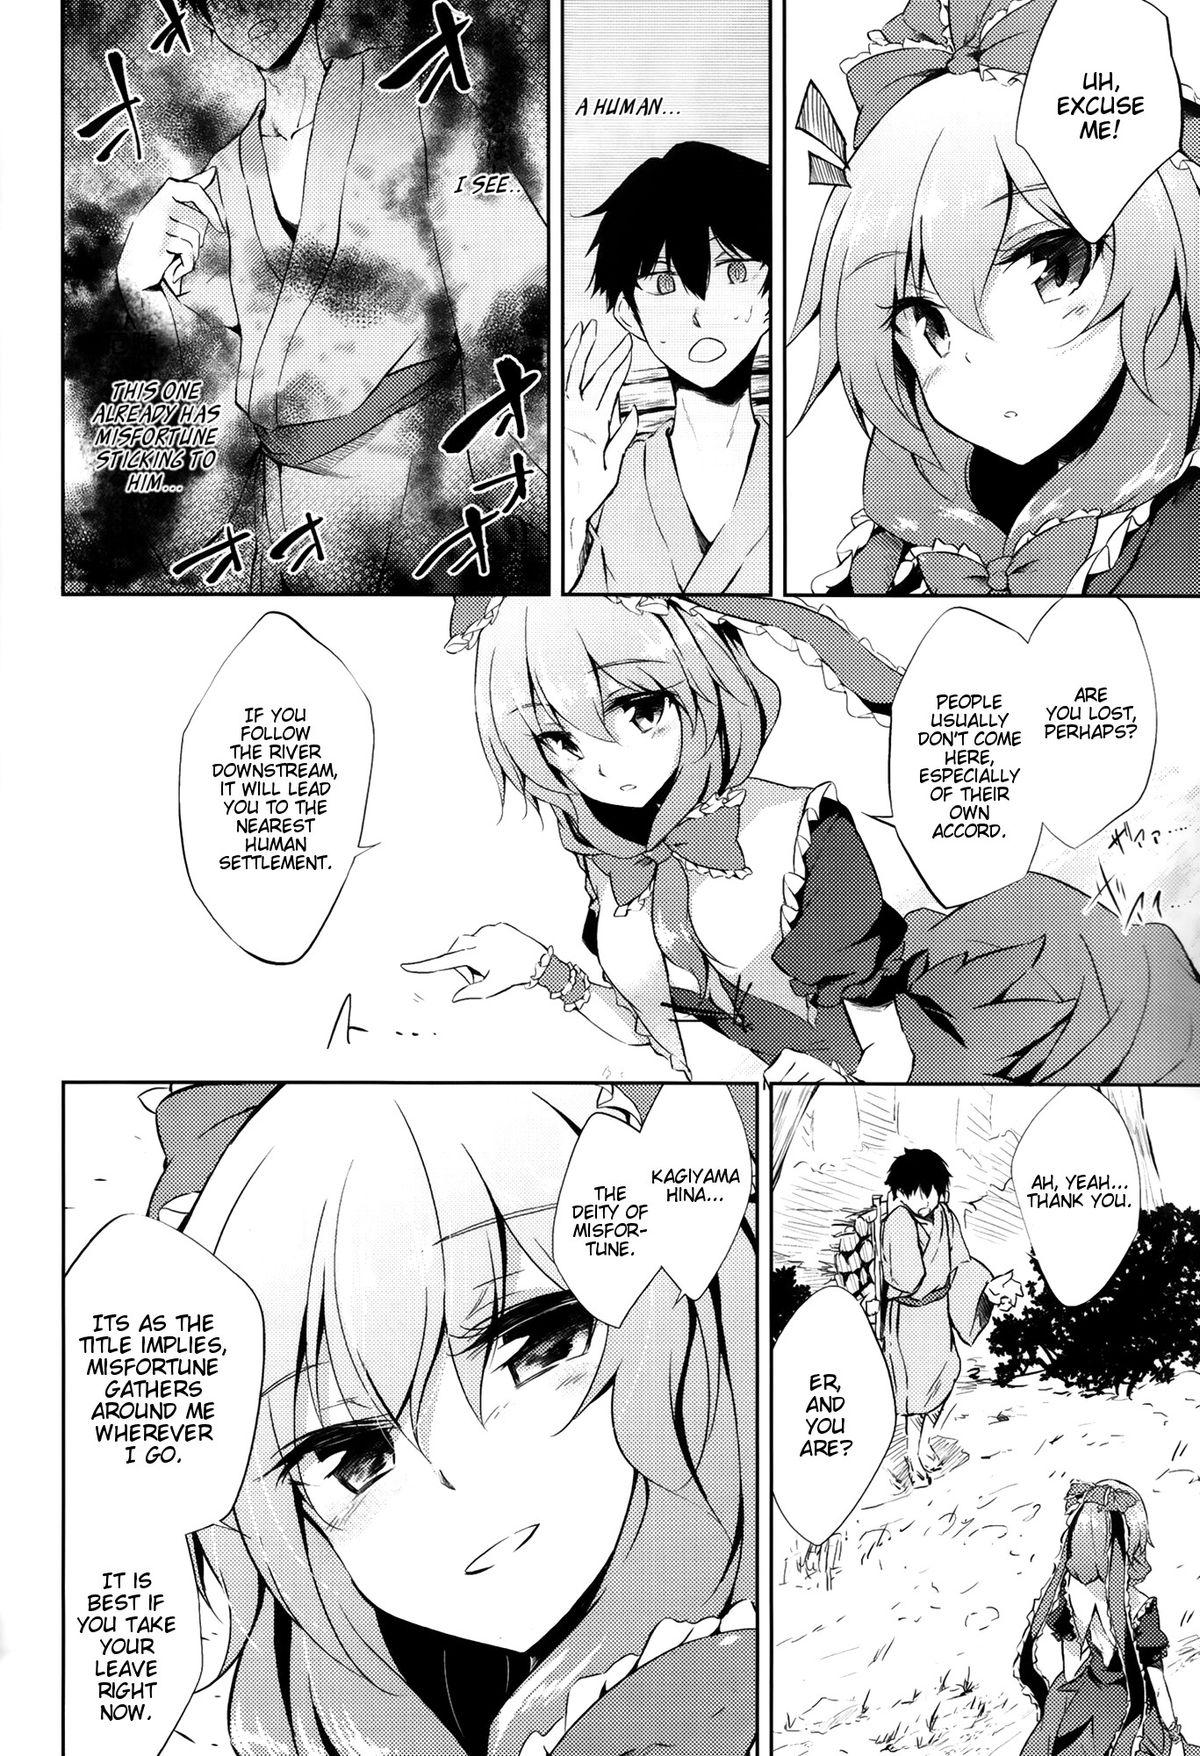 Romantic *Chuui* Horeru to Yakui kara | *Warning* Fall in love at your own risk - Touhou project Fit - Page 4